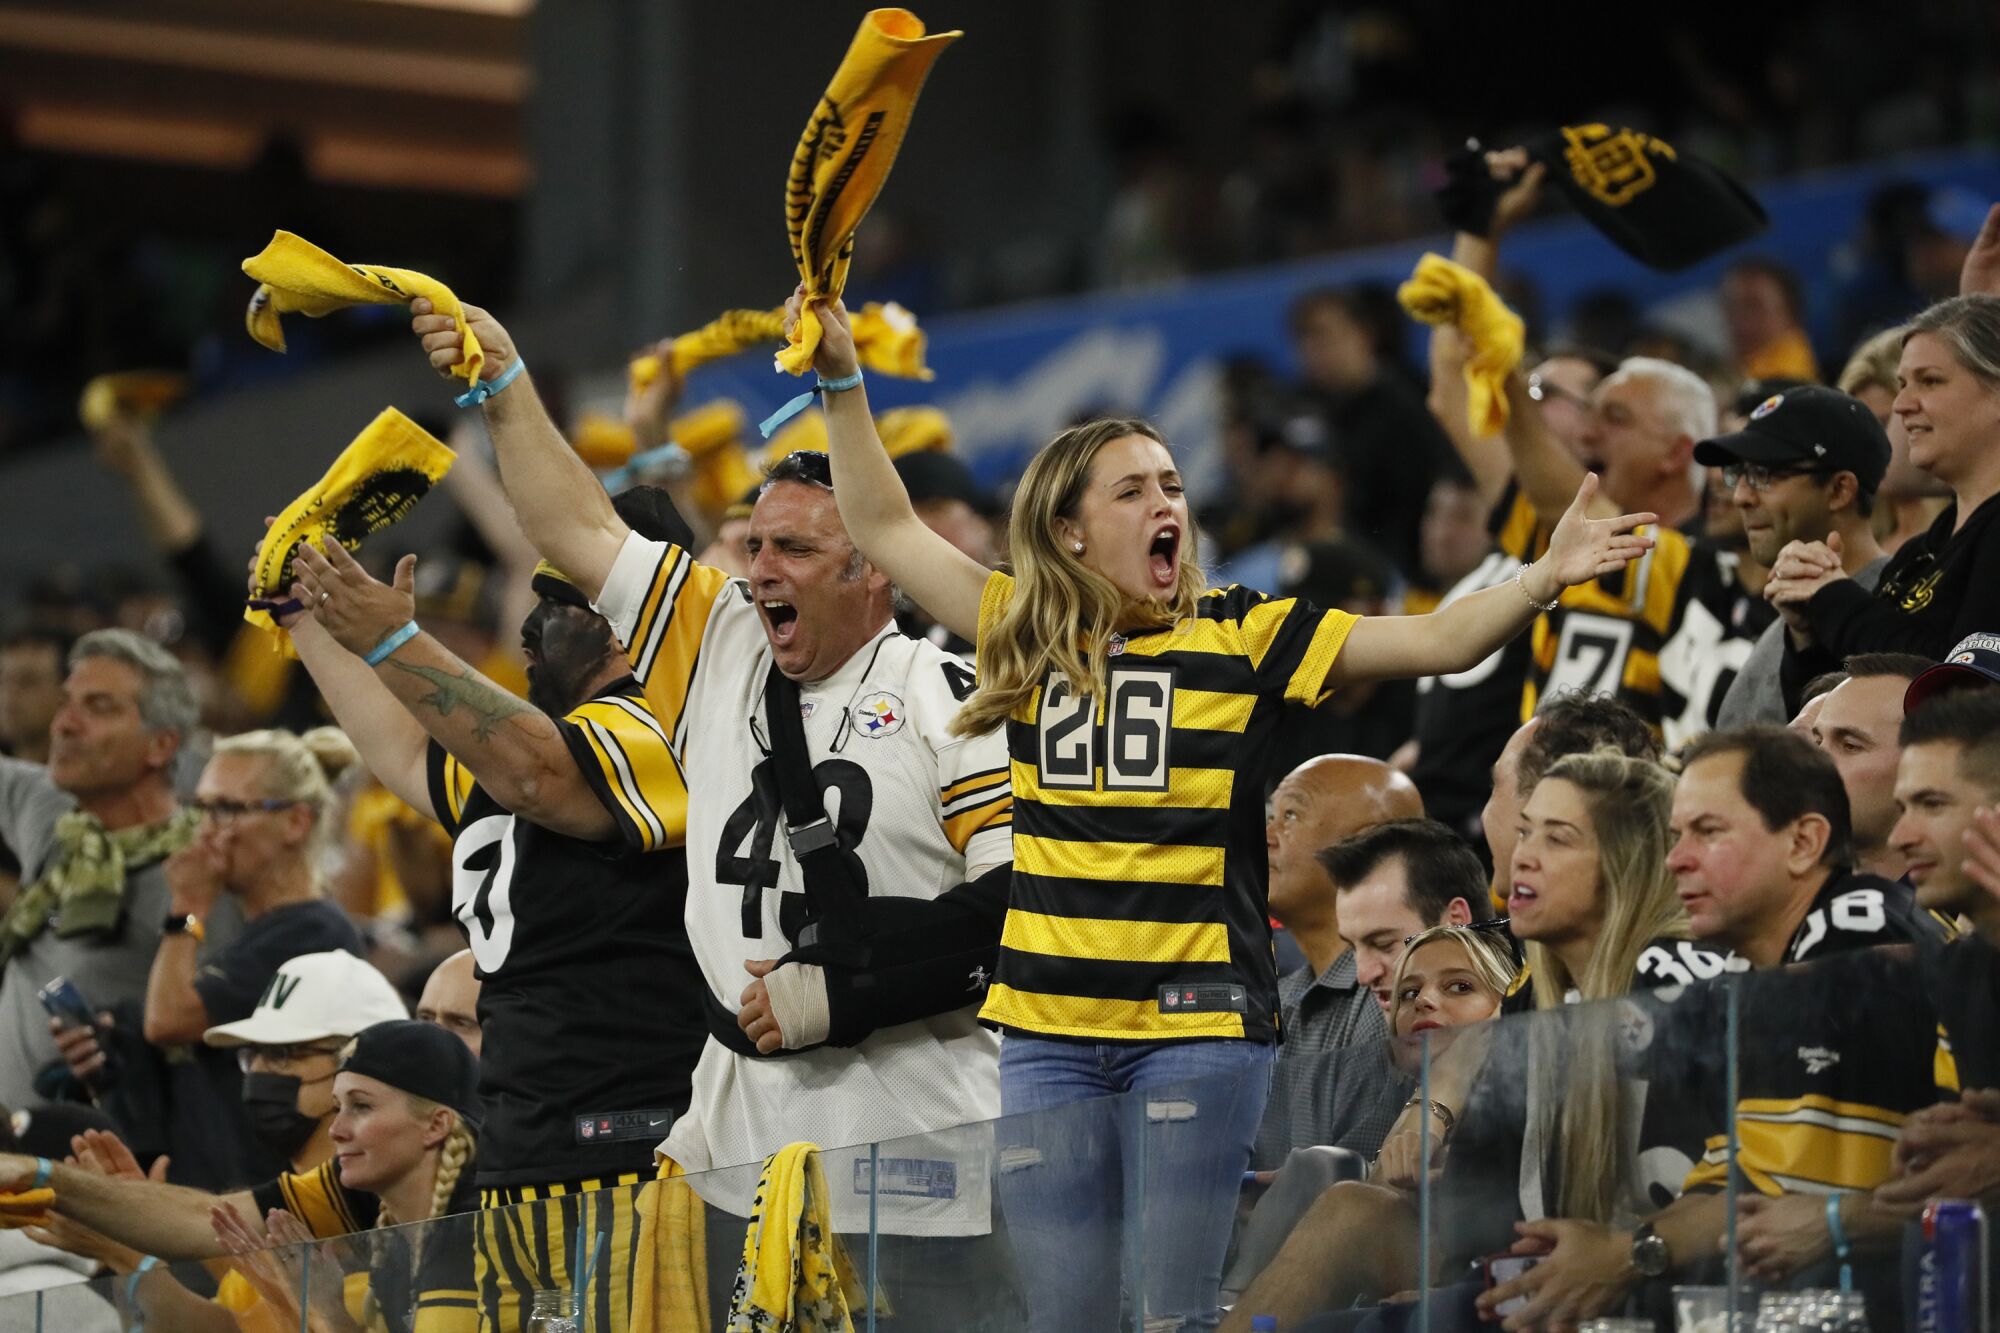 Steelers fans cheer Pittsburgh rallies to tie the game 34-34 against the Chargers in the fourth quarter.